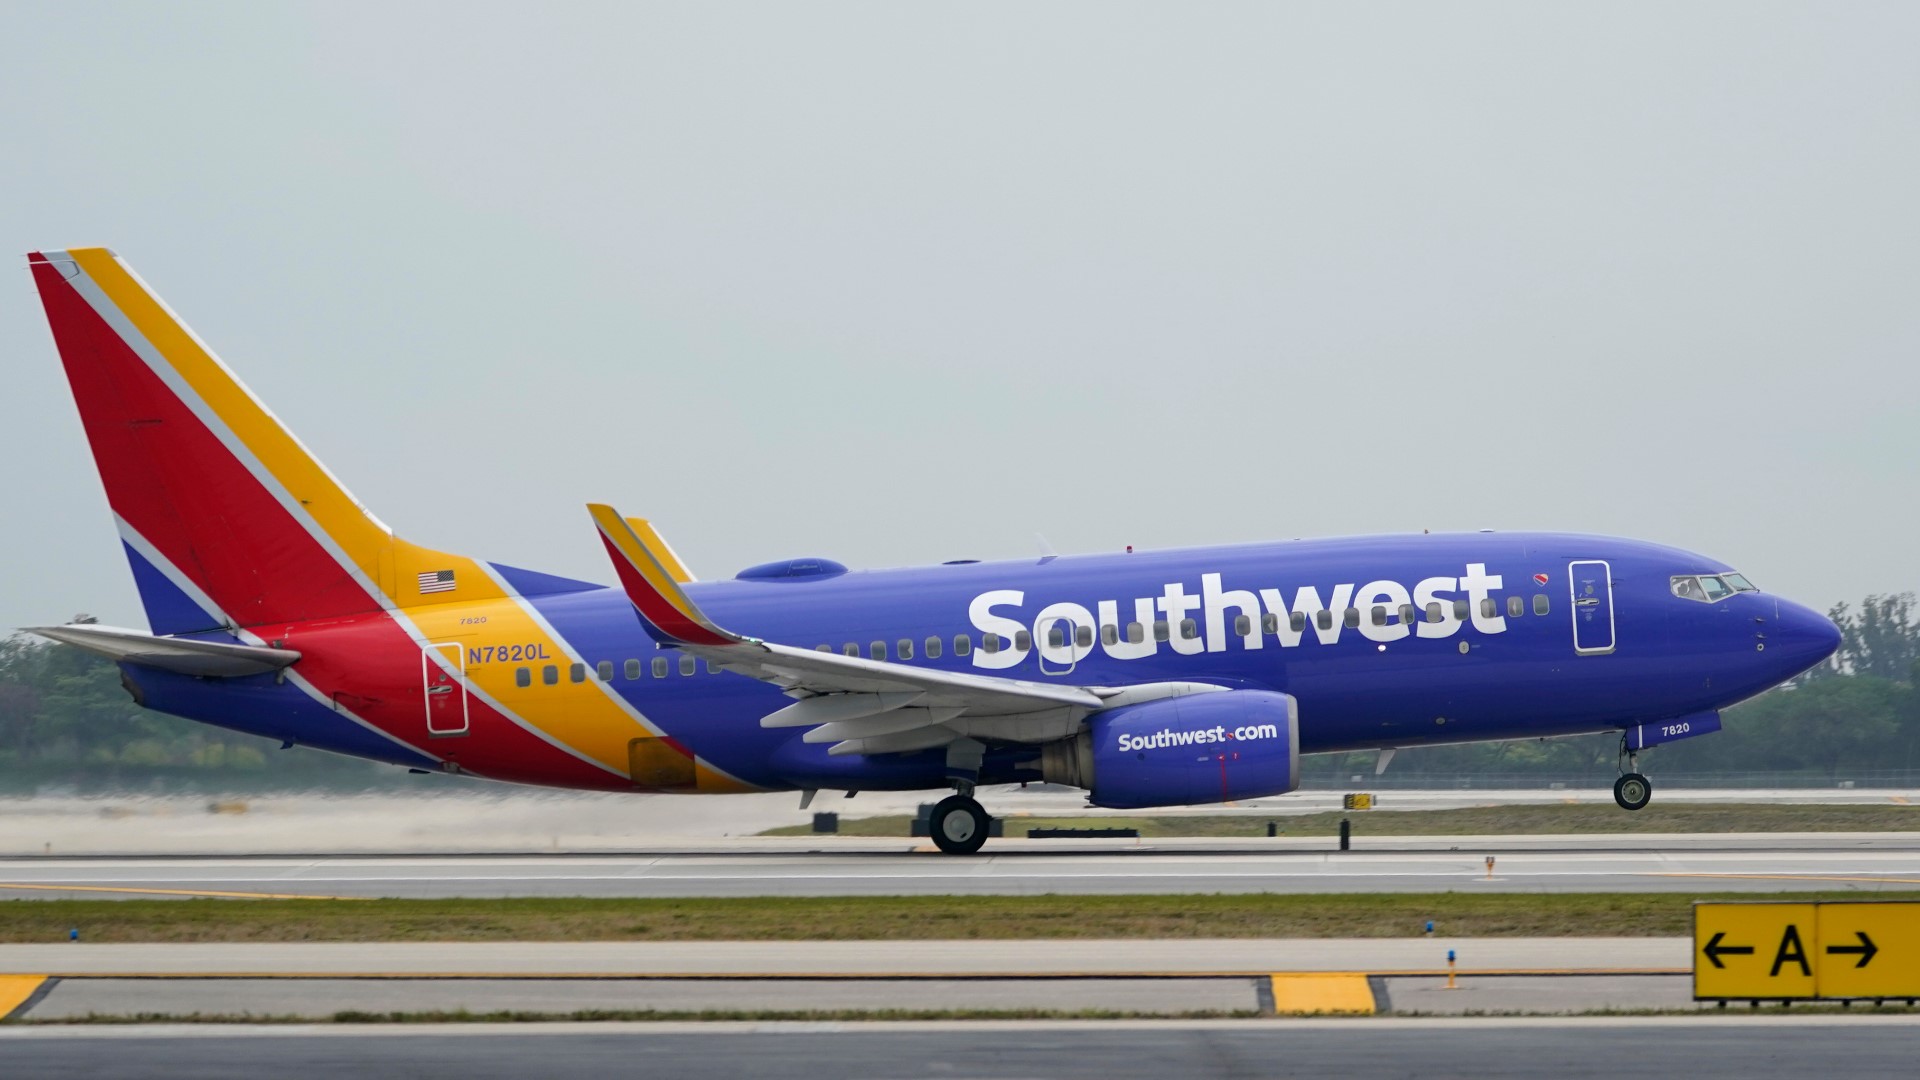 What's going on with Southwest Airlines? Several flights delayed